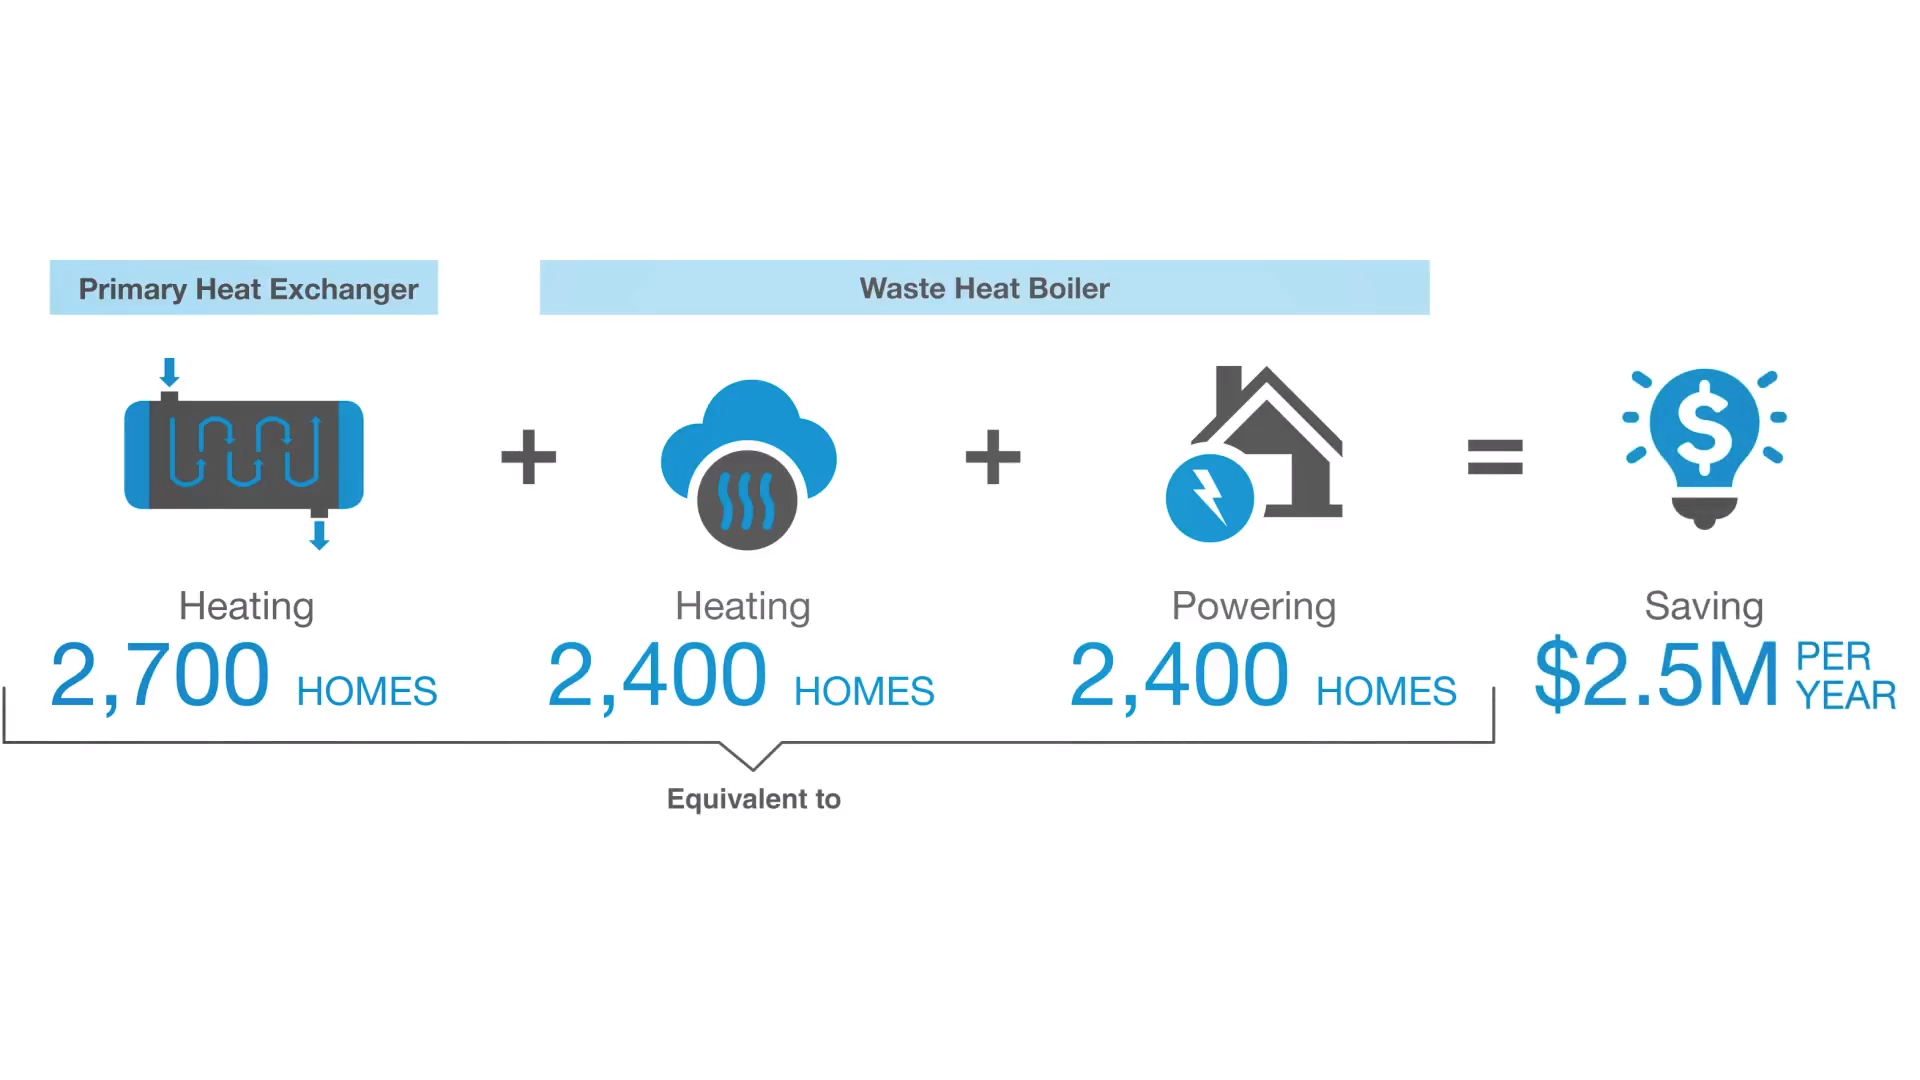 This image displays 2D graphics that were animated by Trinity animators for the explainer video -based on illustrations that The Metro Plant provided as a reference. This particular graphic displays the financial benefits that incineration system supplies. A primary heat exchanger heats 2,700 homes while the waste heat boiler heats 2,400 homes and powers 2,400 homes saving 2.5 million dollars per year.